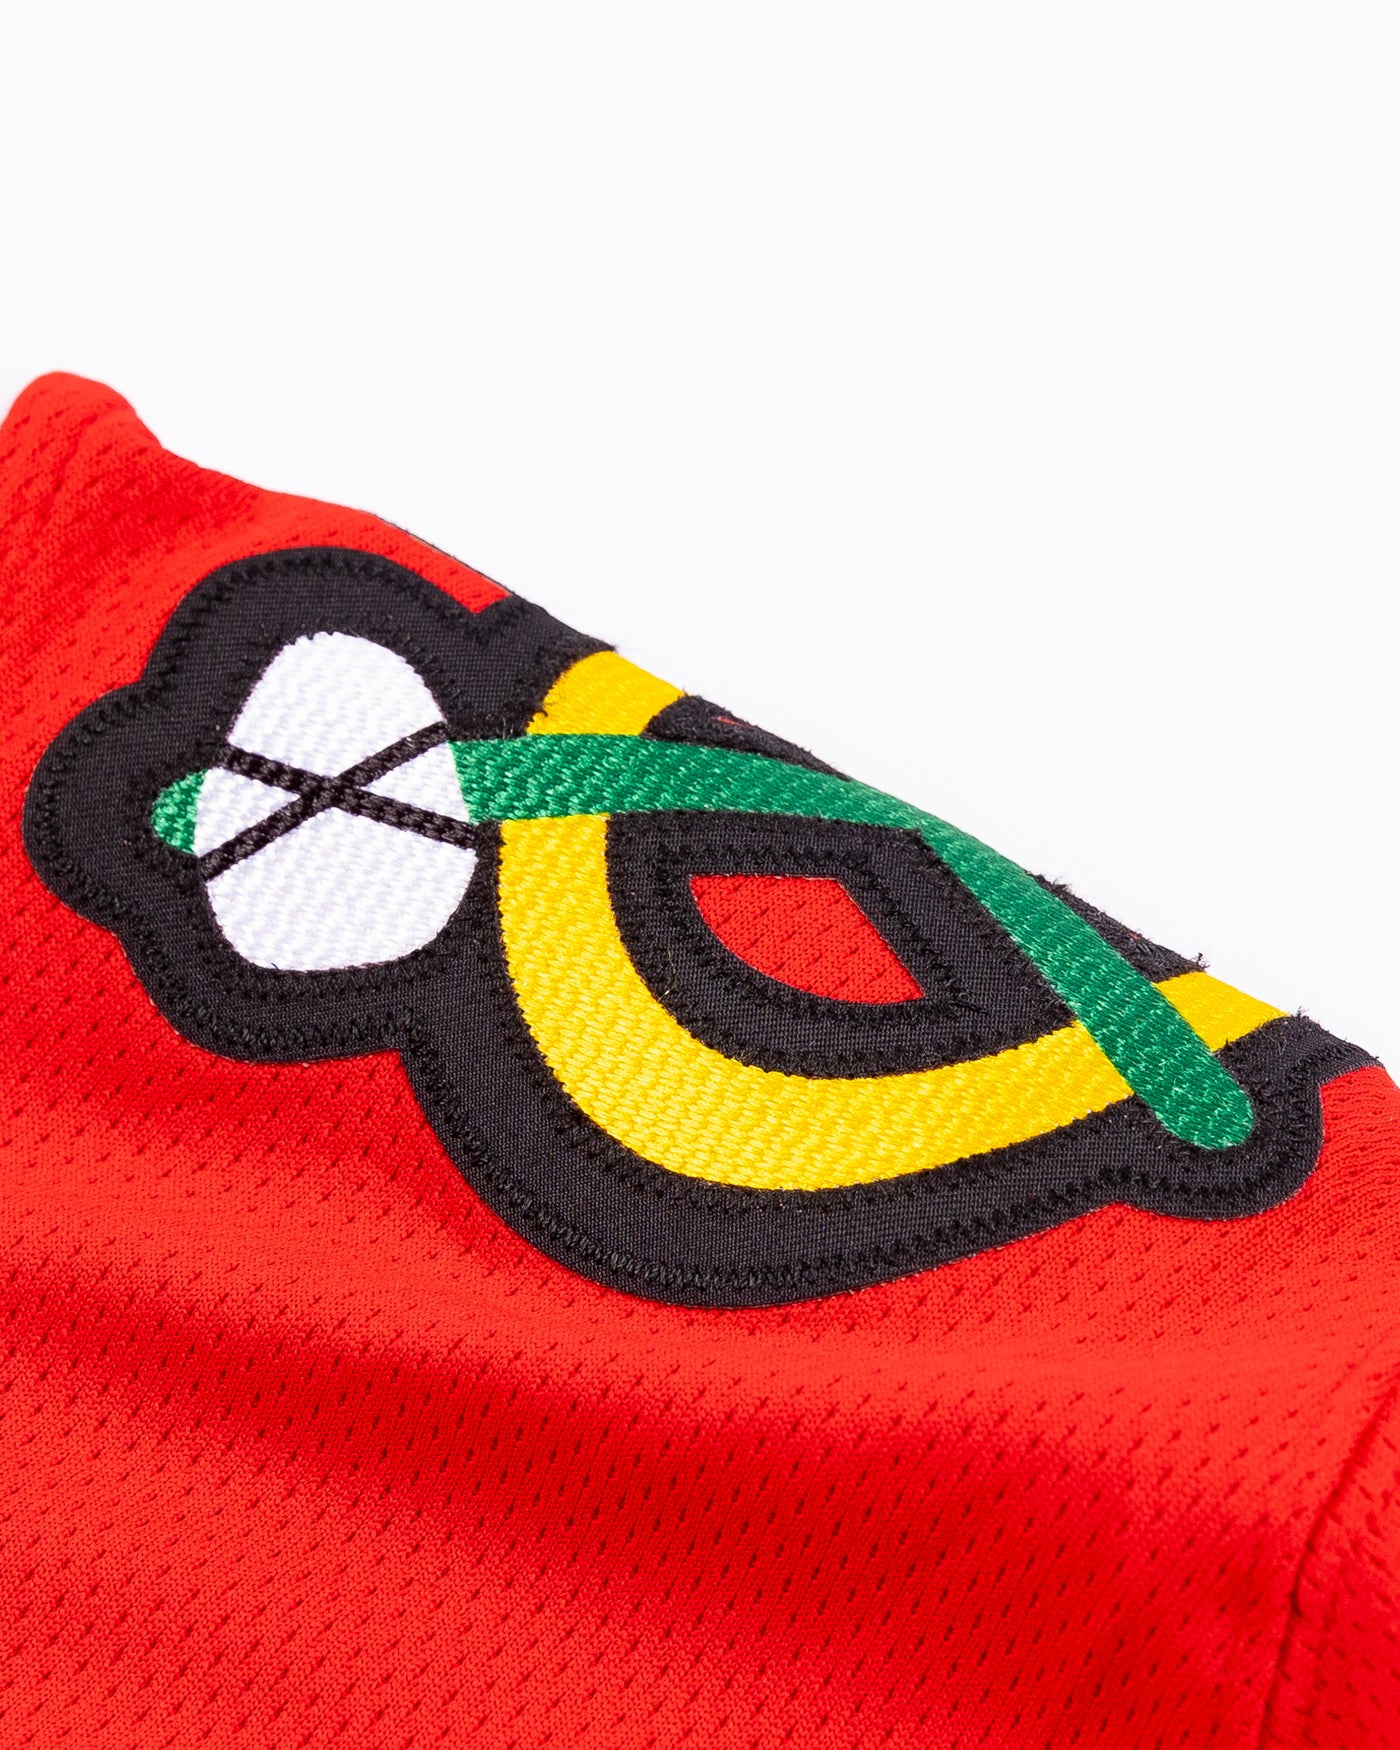 red Fanatics Chicago Blackhawks jersey with stitched Taylor Hall name and number - alt shoulder detail lay flat